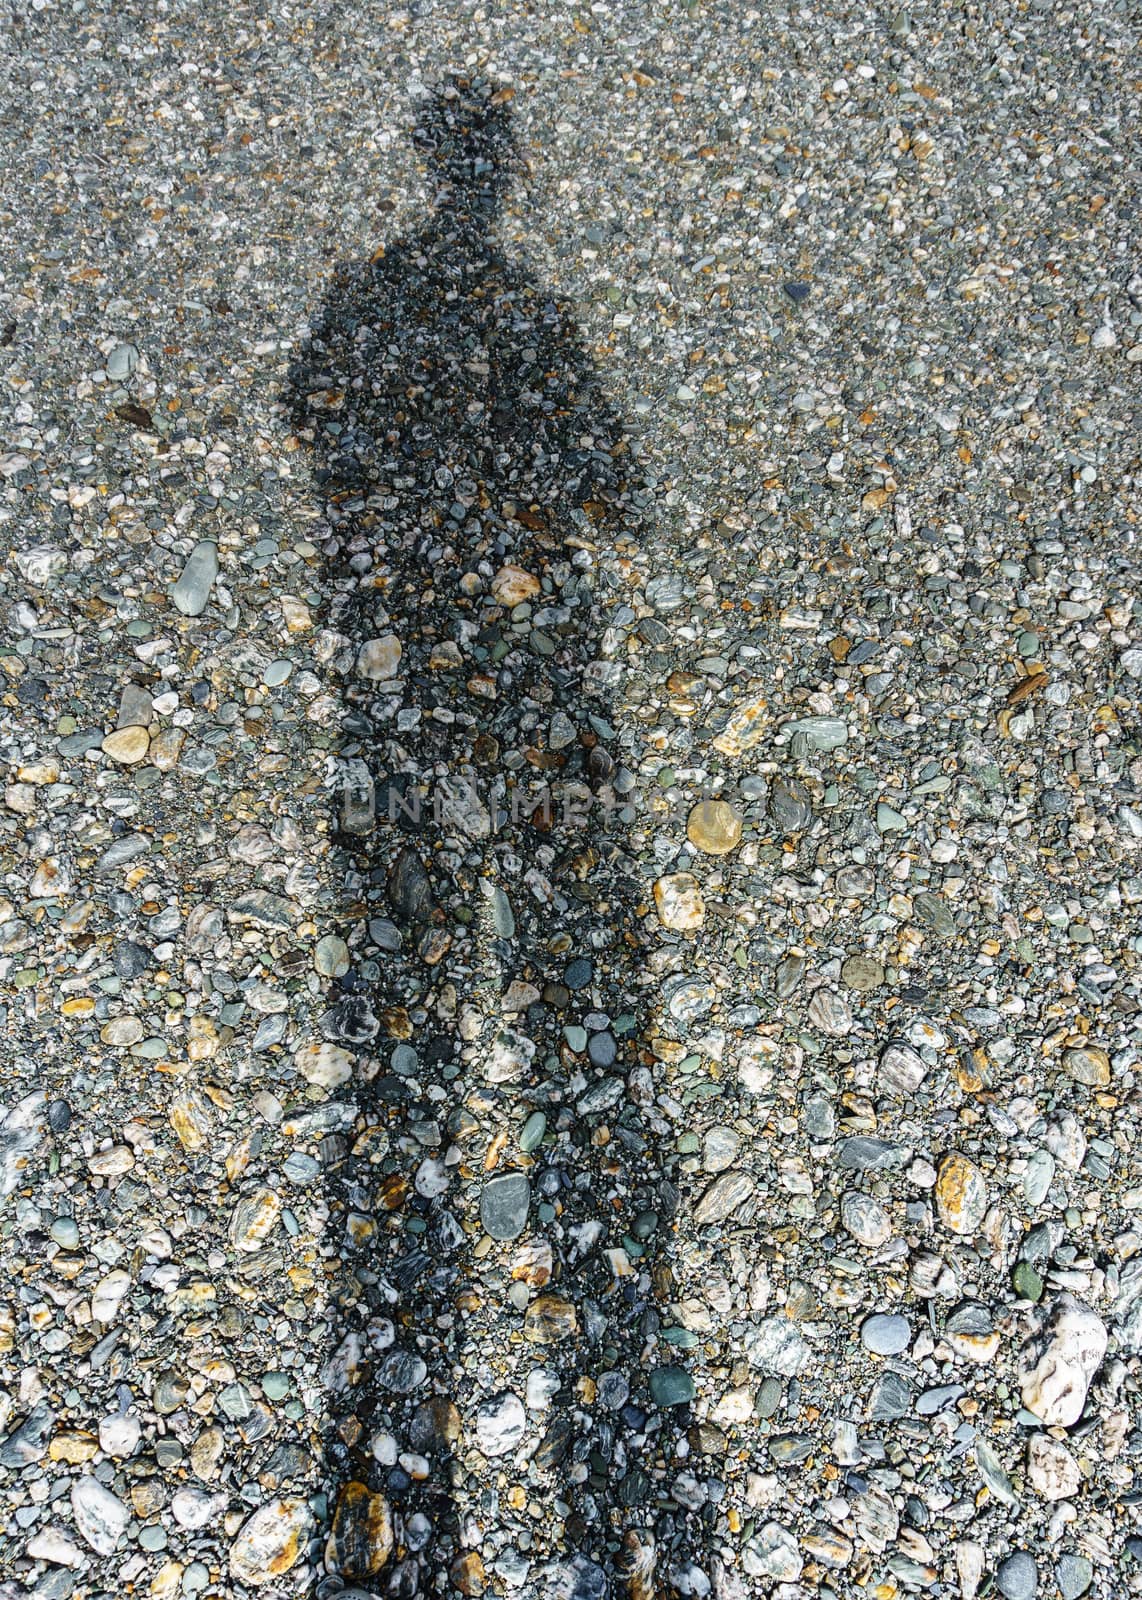 Stretched man shadow on stone covered ground, dry river bed. by brians101